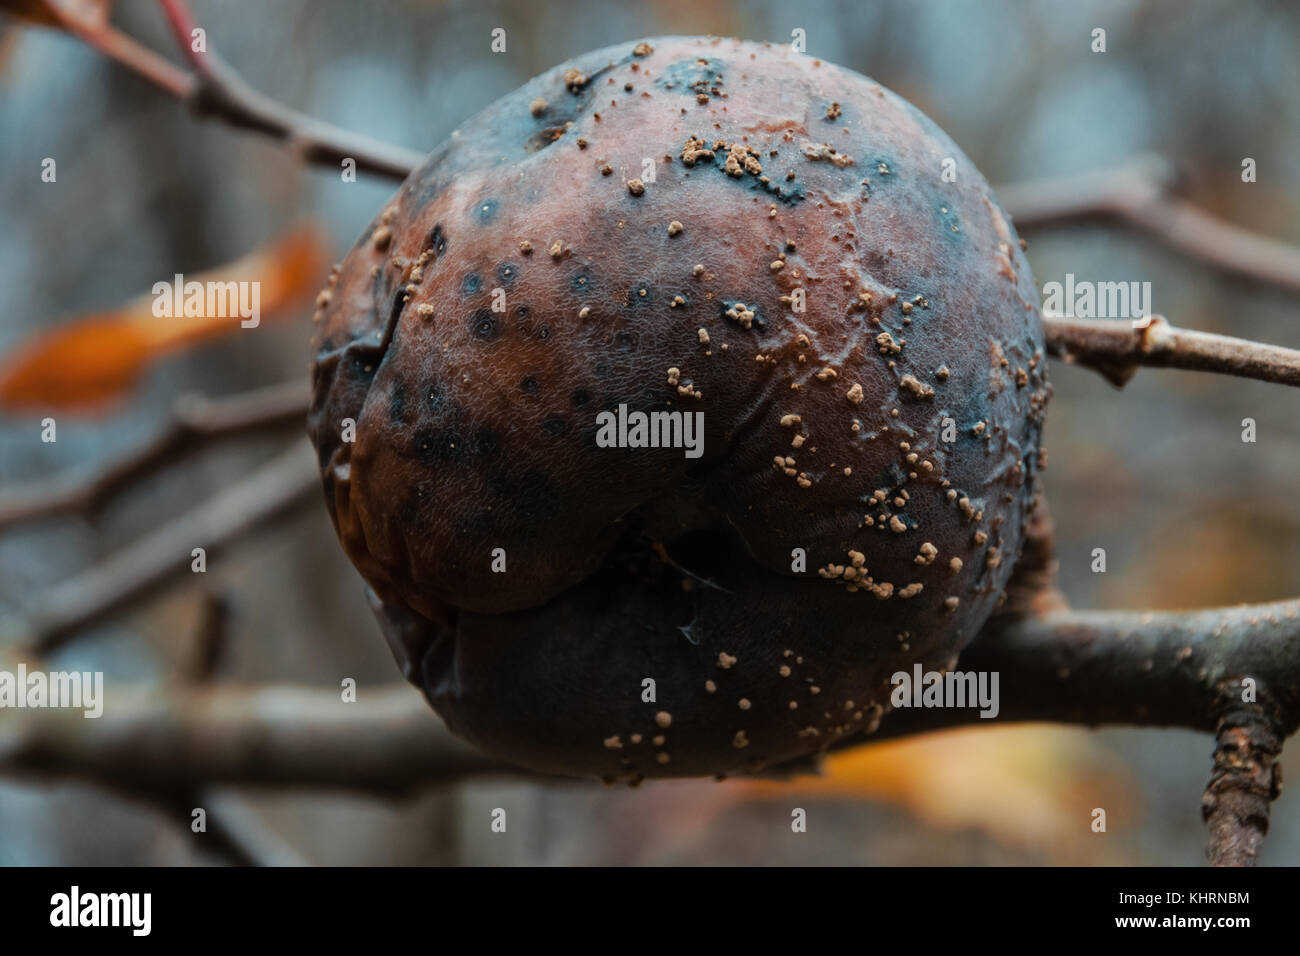 Low Angle View Of Rotten Apple With White Mold Hanging On Tree In Orchard During The Autumn Season Stock Photo